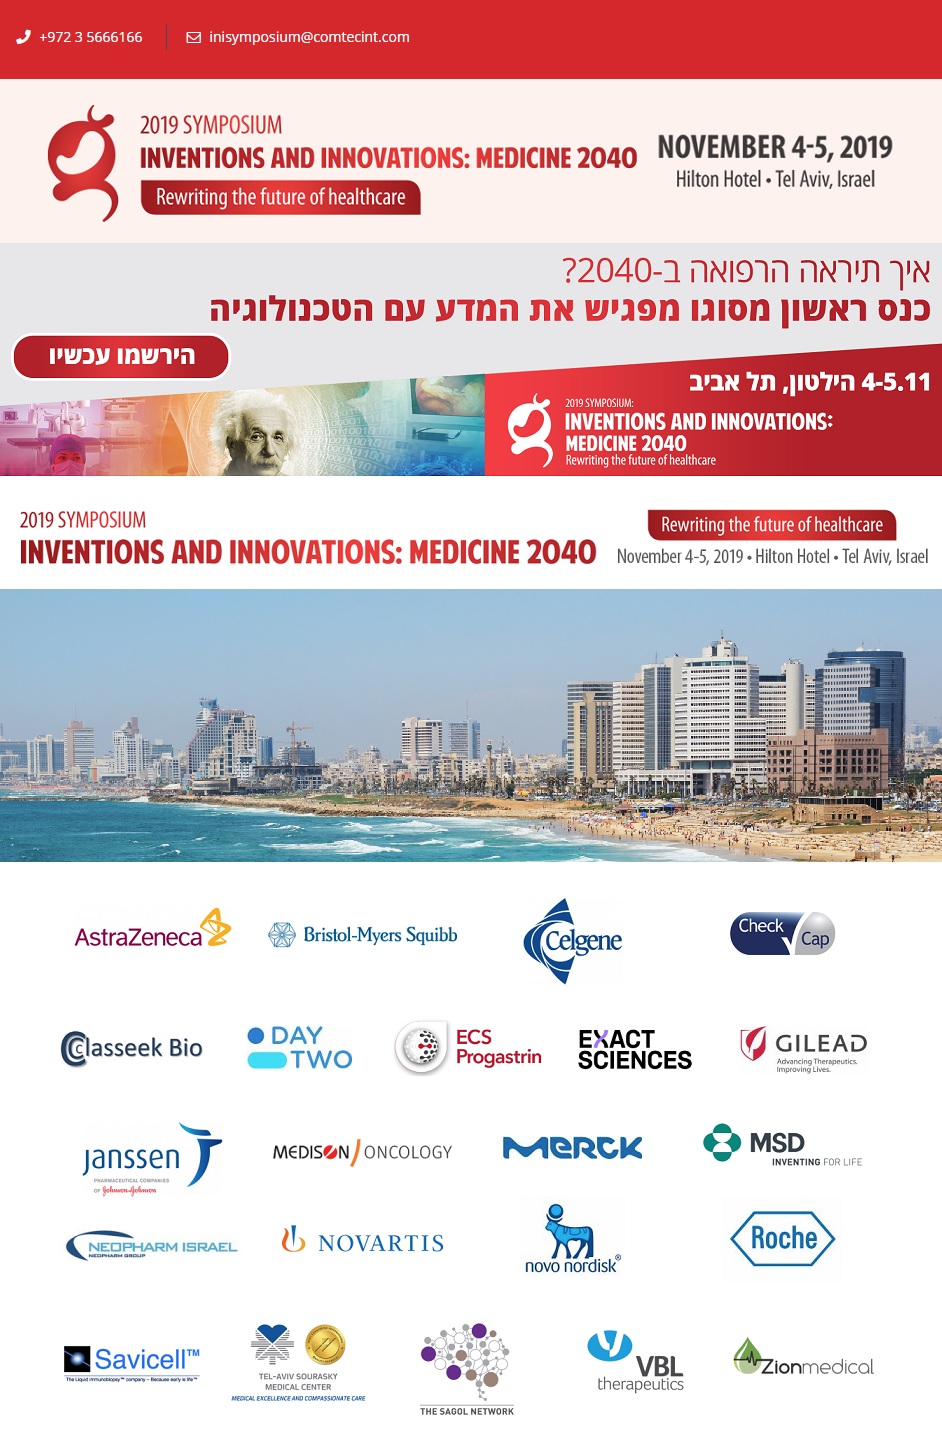 Inventions and Innovations – Medicine 2040 (INI): Rewriting the Future of Healthcare Symposium 2019